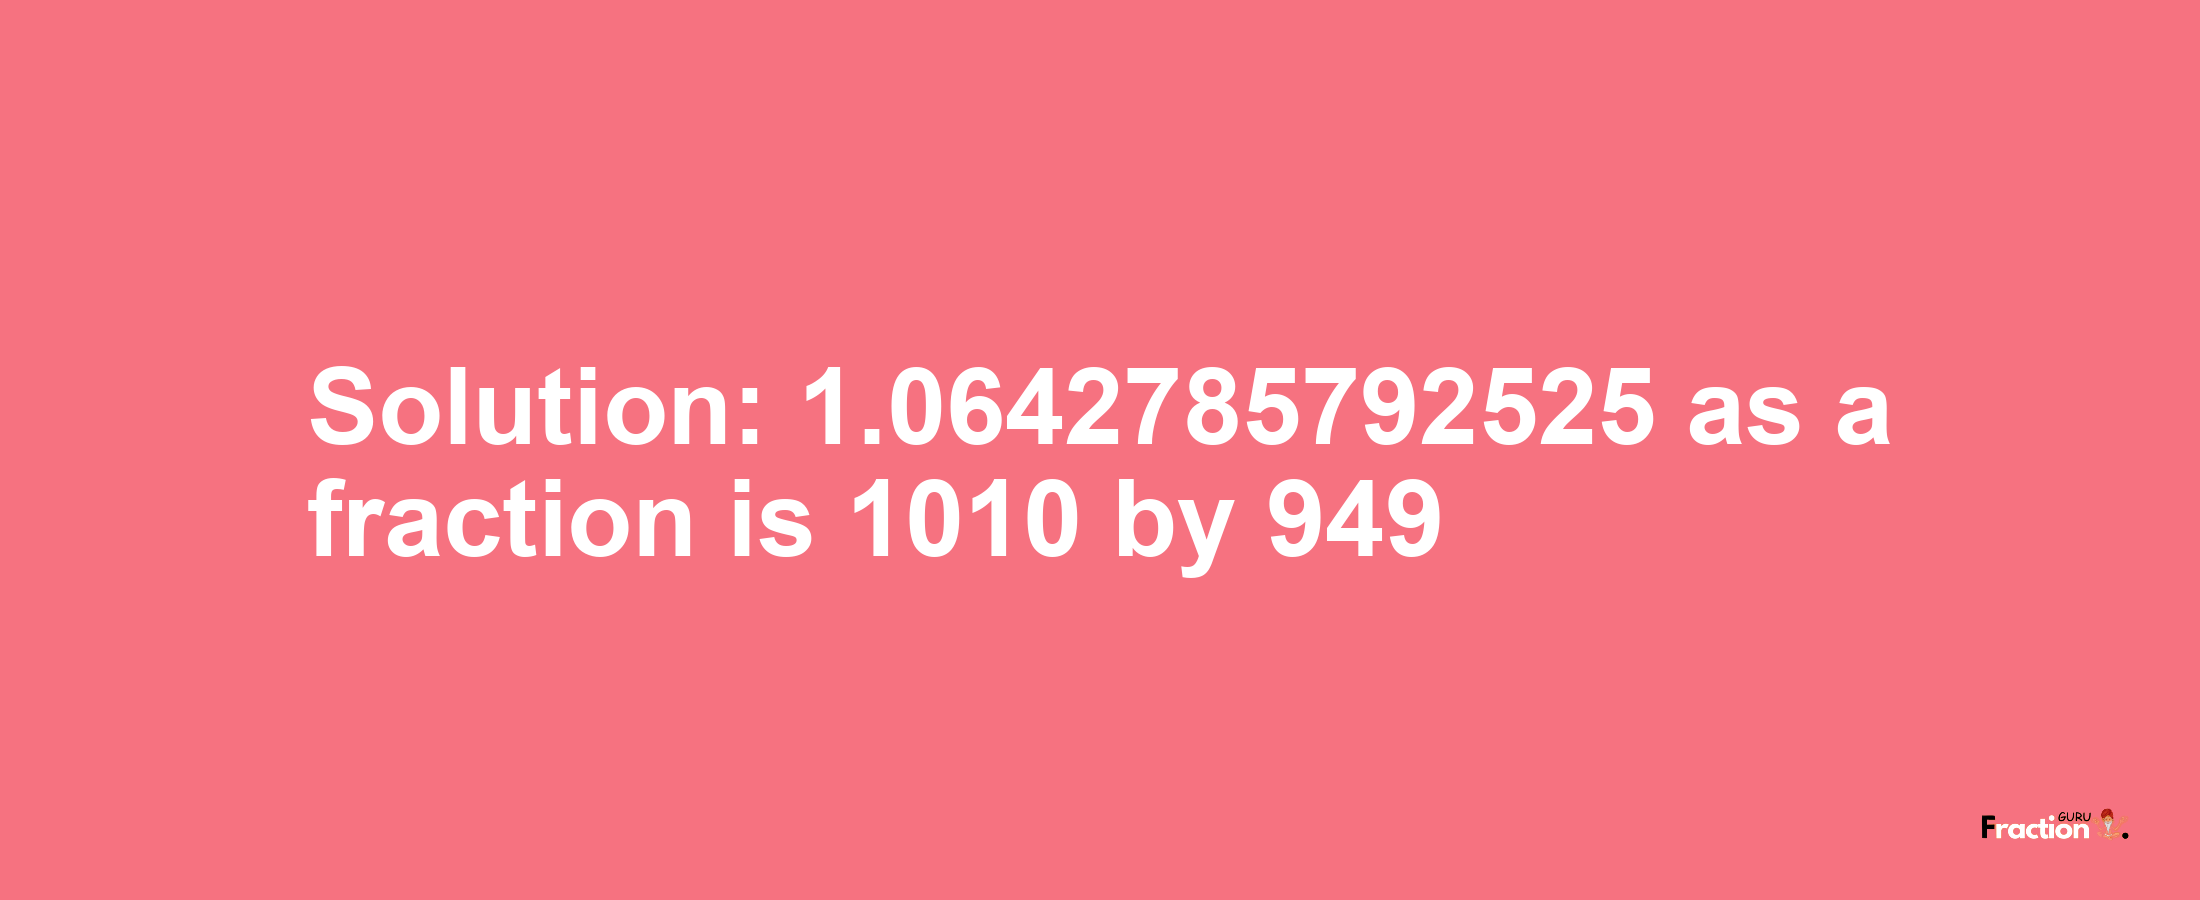 Solution:1.0642785792525 as a fraction is 1010/949